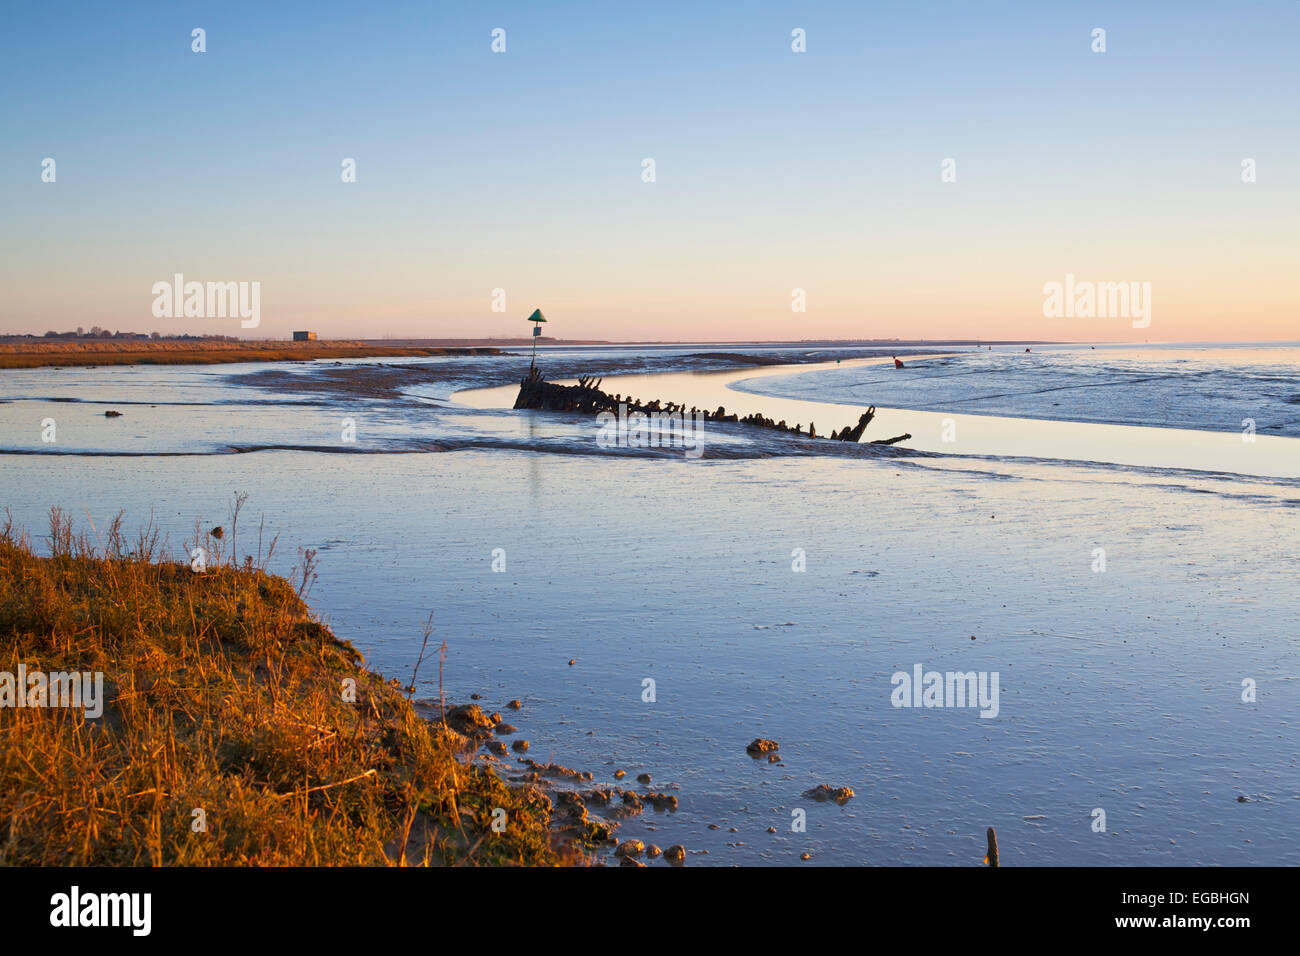 Faversham Creek, Kent, UK. 22nd February, 2015. UK weather: A cold and frosty start to Sunday as the clear blue sky reflects over a wreck at low tide along the river bank. The weather in the south east for the week ahead will be a mixture of sunshine and clear skies with some showers at times Stock Photo